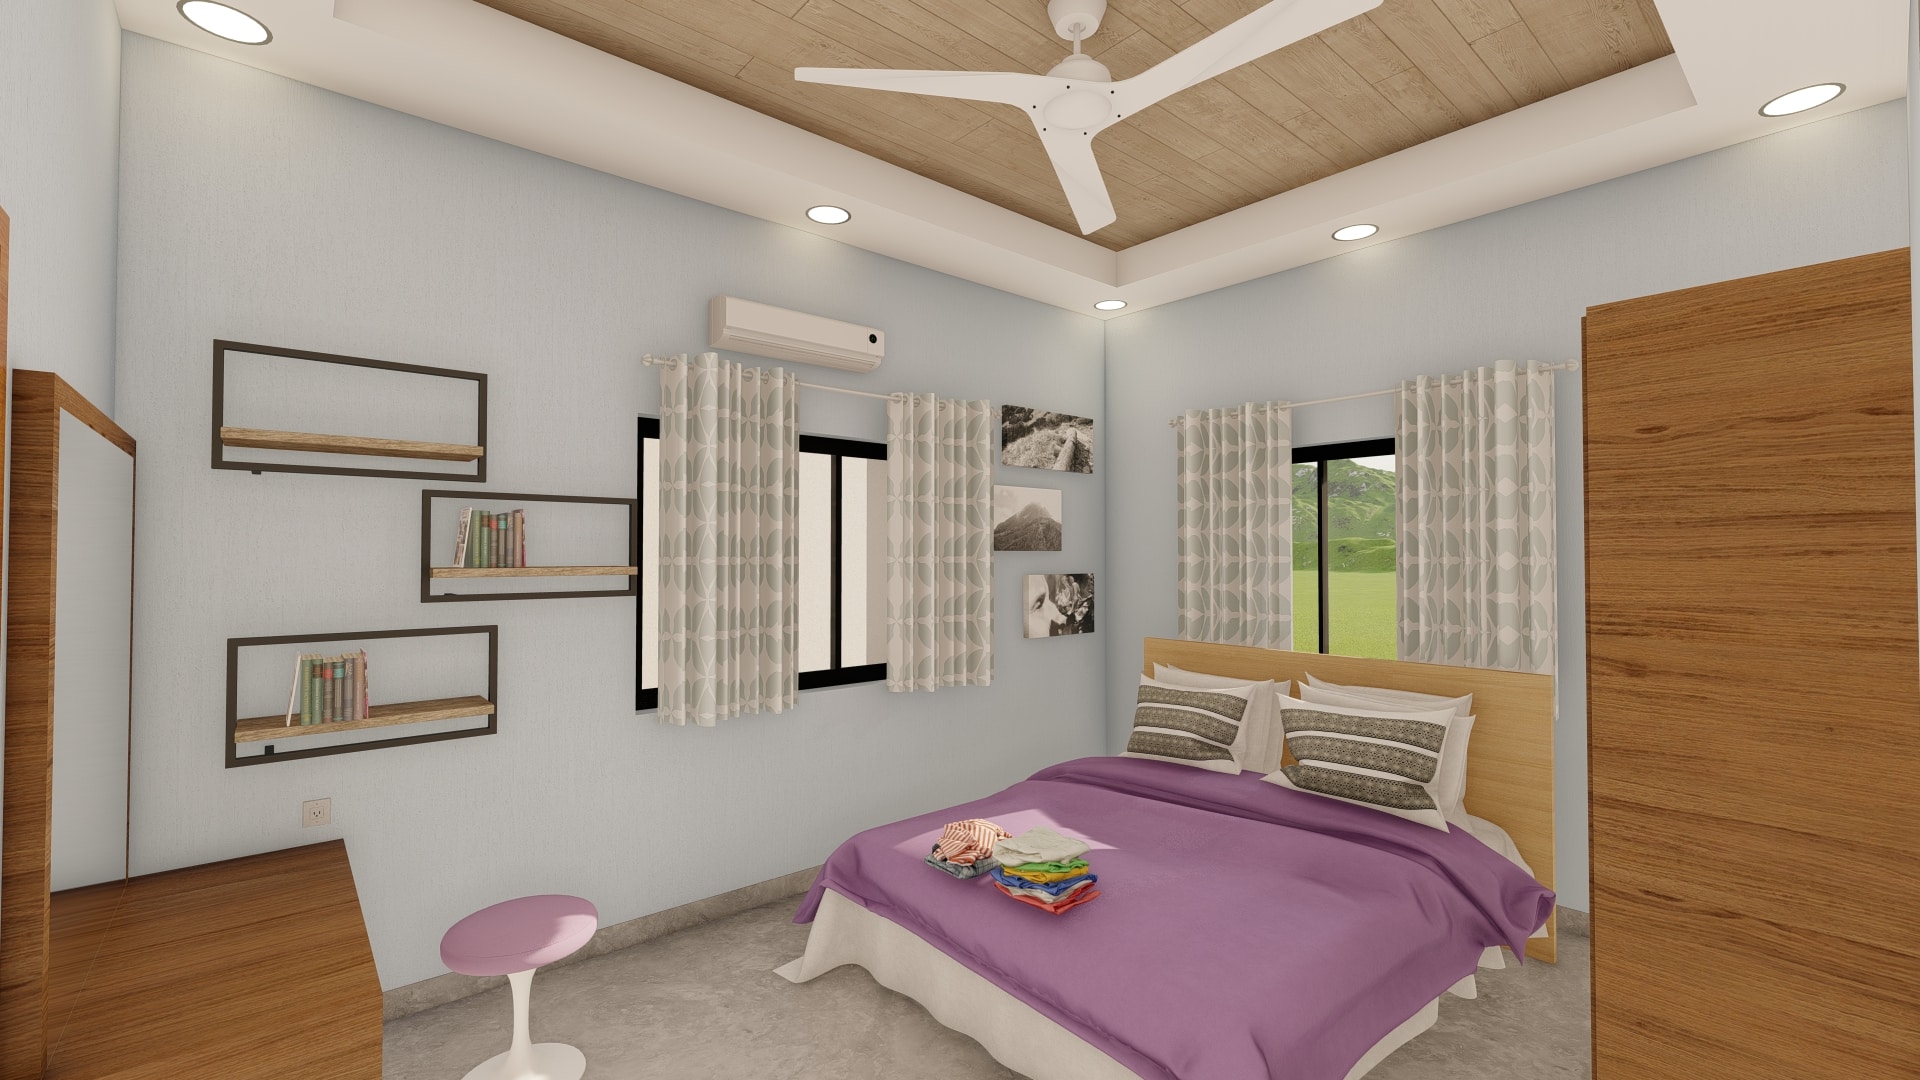 bedroom of new bungalow home design by urban terrace west facing 30x50 sq ft